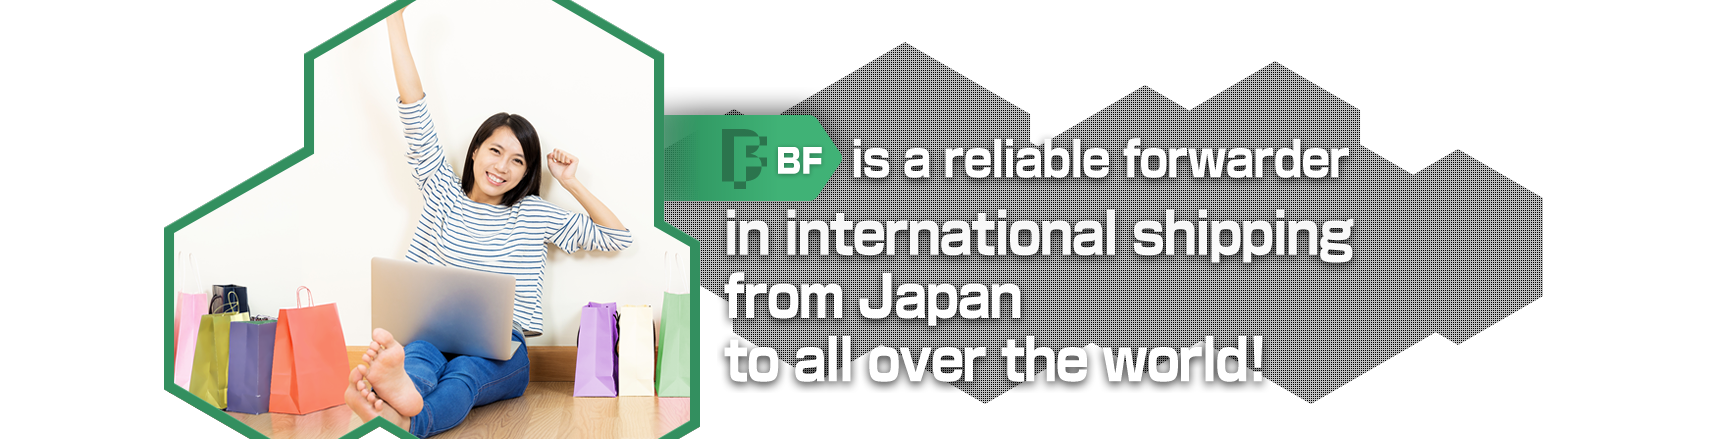 BF is a reliable forwarder in international shippingfrom Japanto all over the world!